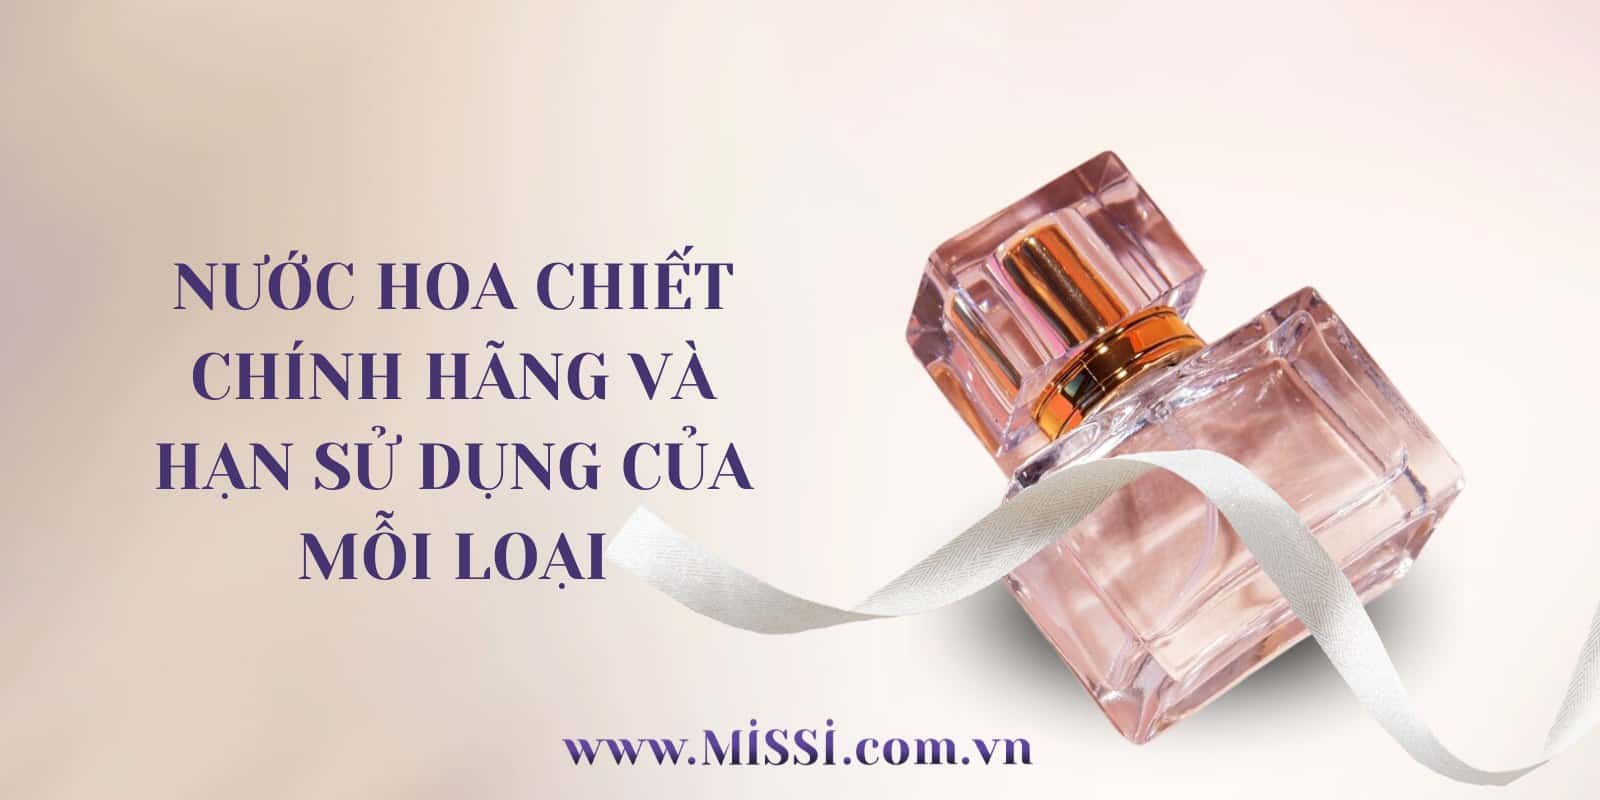 nuoc-hoa-chiet-chinh-hang-01